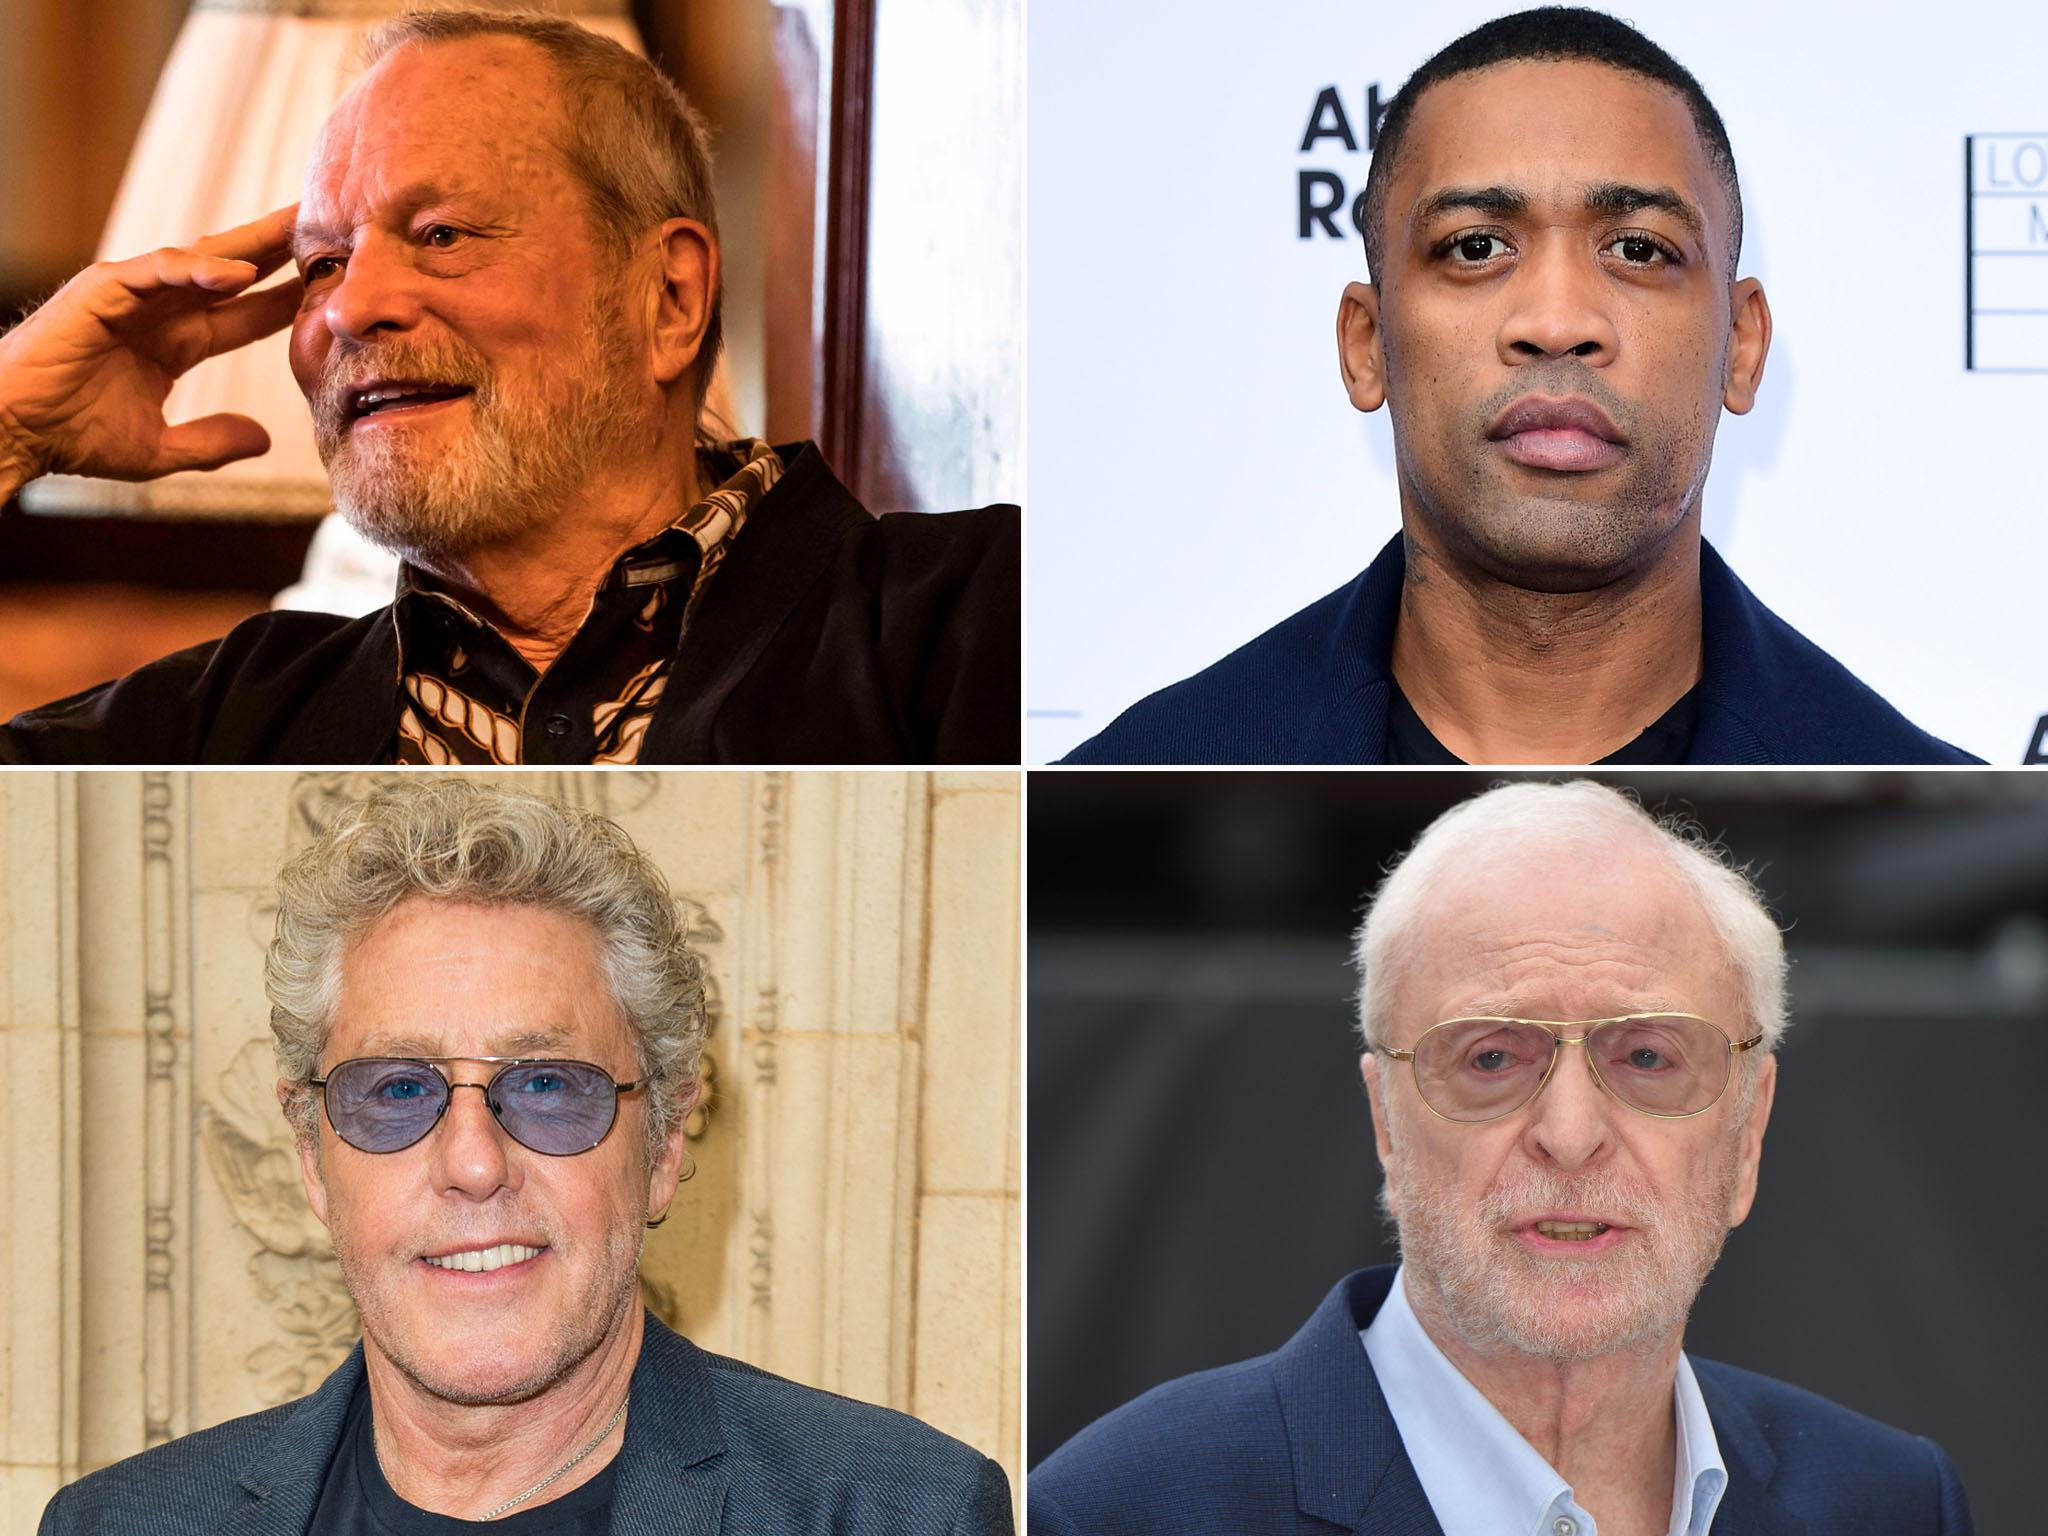 Clockwise from top left: Terry Gilliam, Wiley, Michael Caine and Roger Daltrey